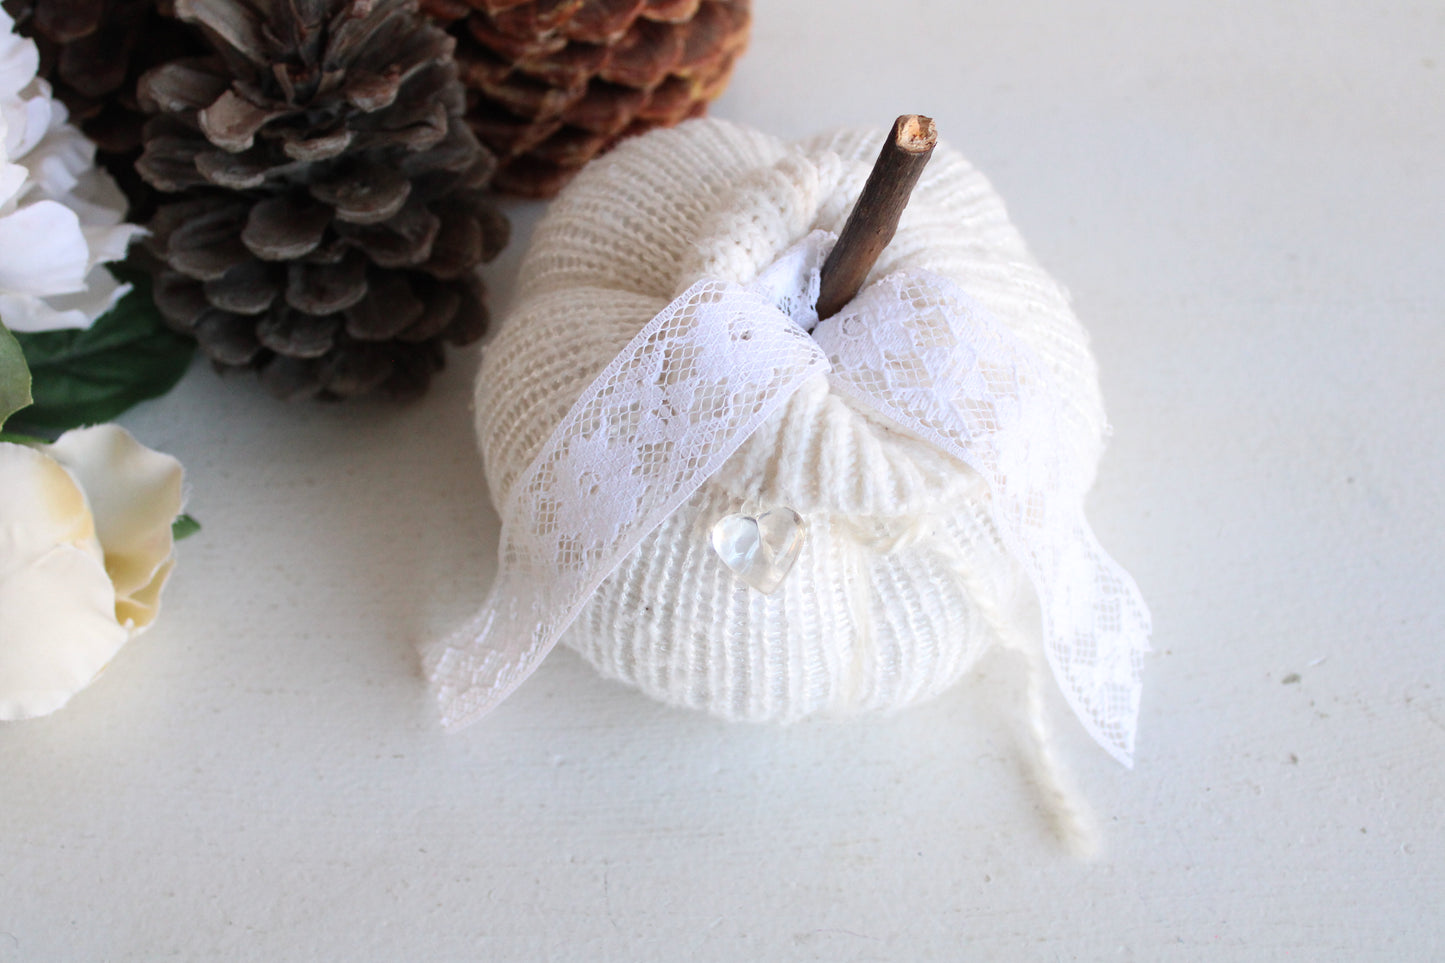 Creamy White Knit Pumpkin PIllow Pouf with Vintage Lace And Crystal Heart